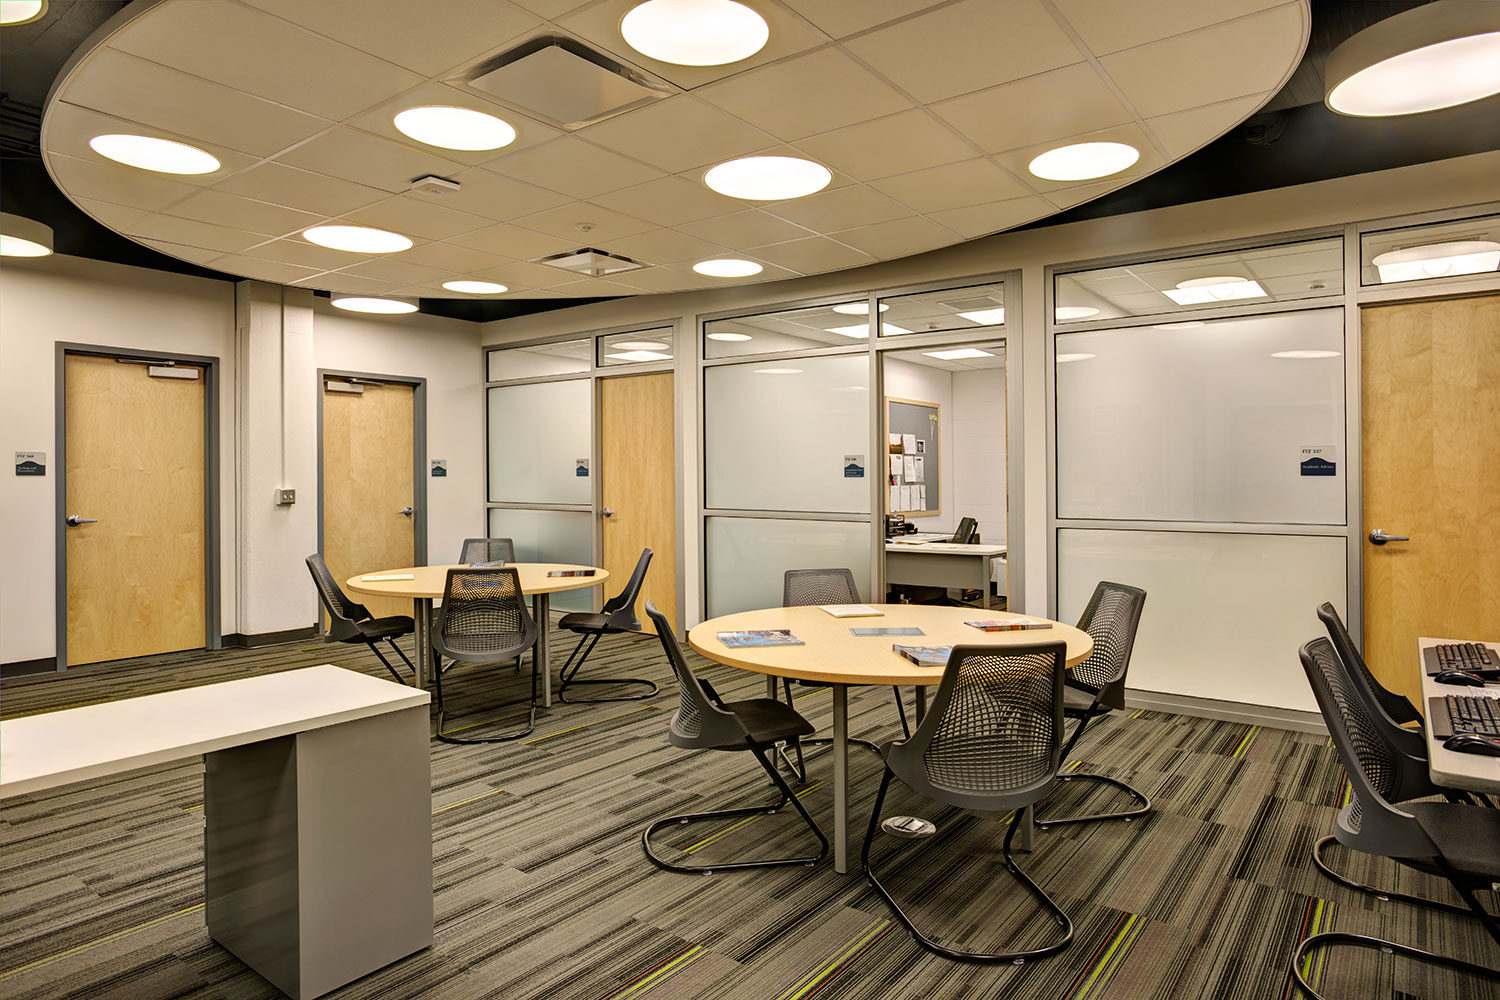 Conference room in the reconfiguration and reconstruction of 100,000sf of existing space in three buildings at Hudson Valley Community College.